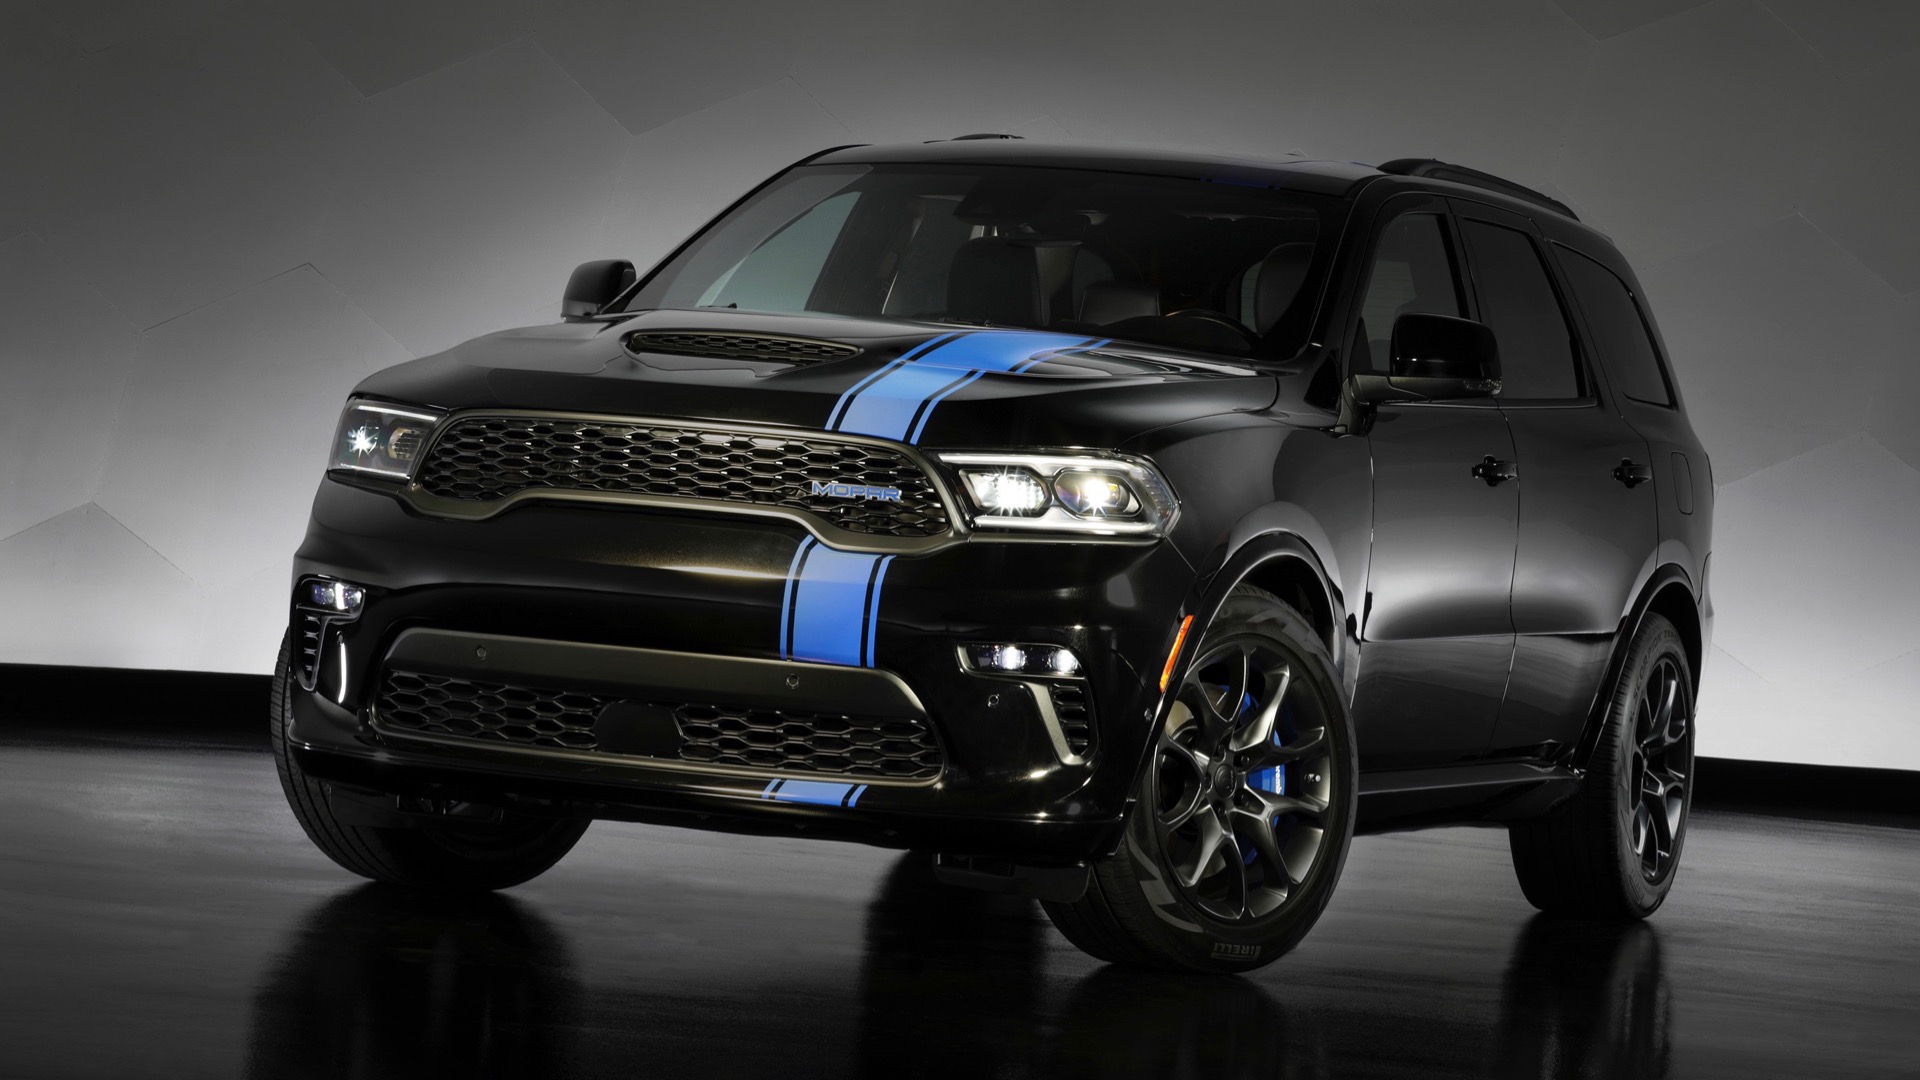 2023 Dodge Durango Price and Review